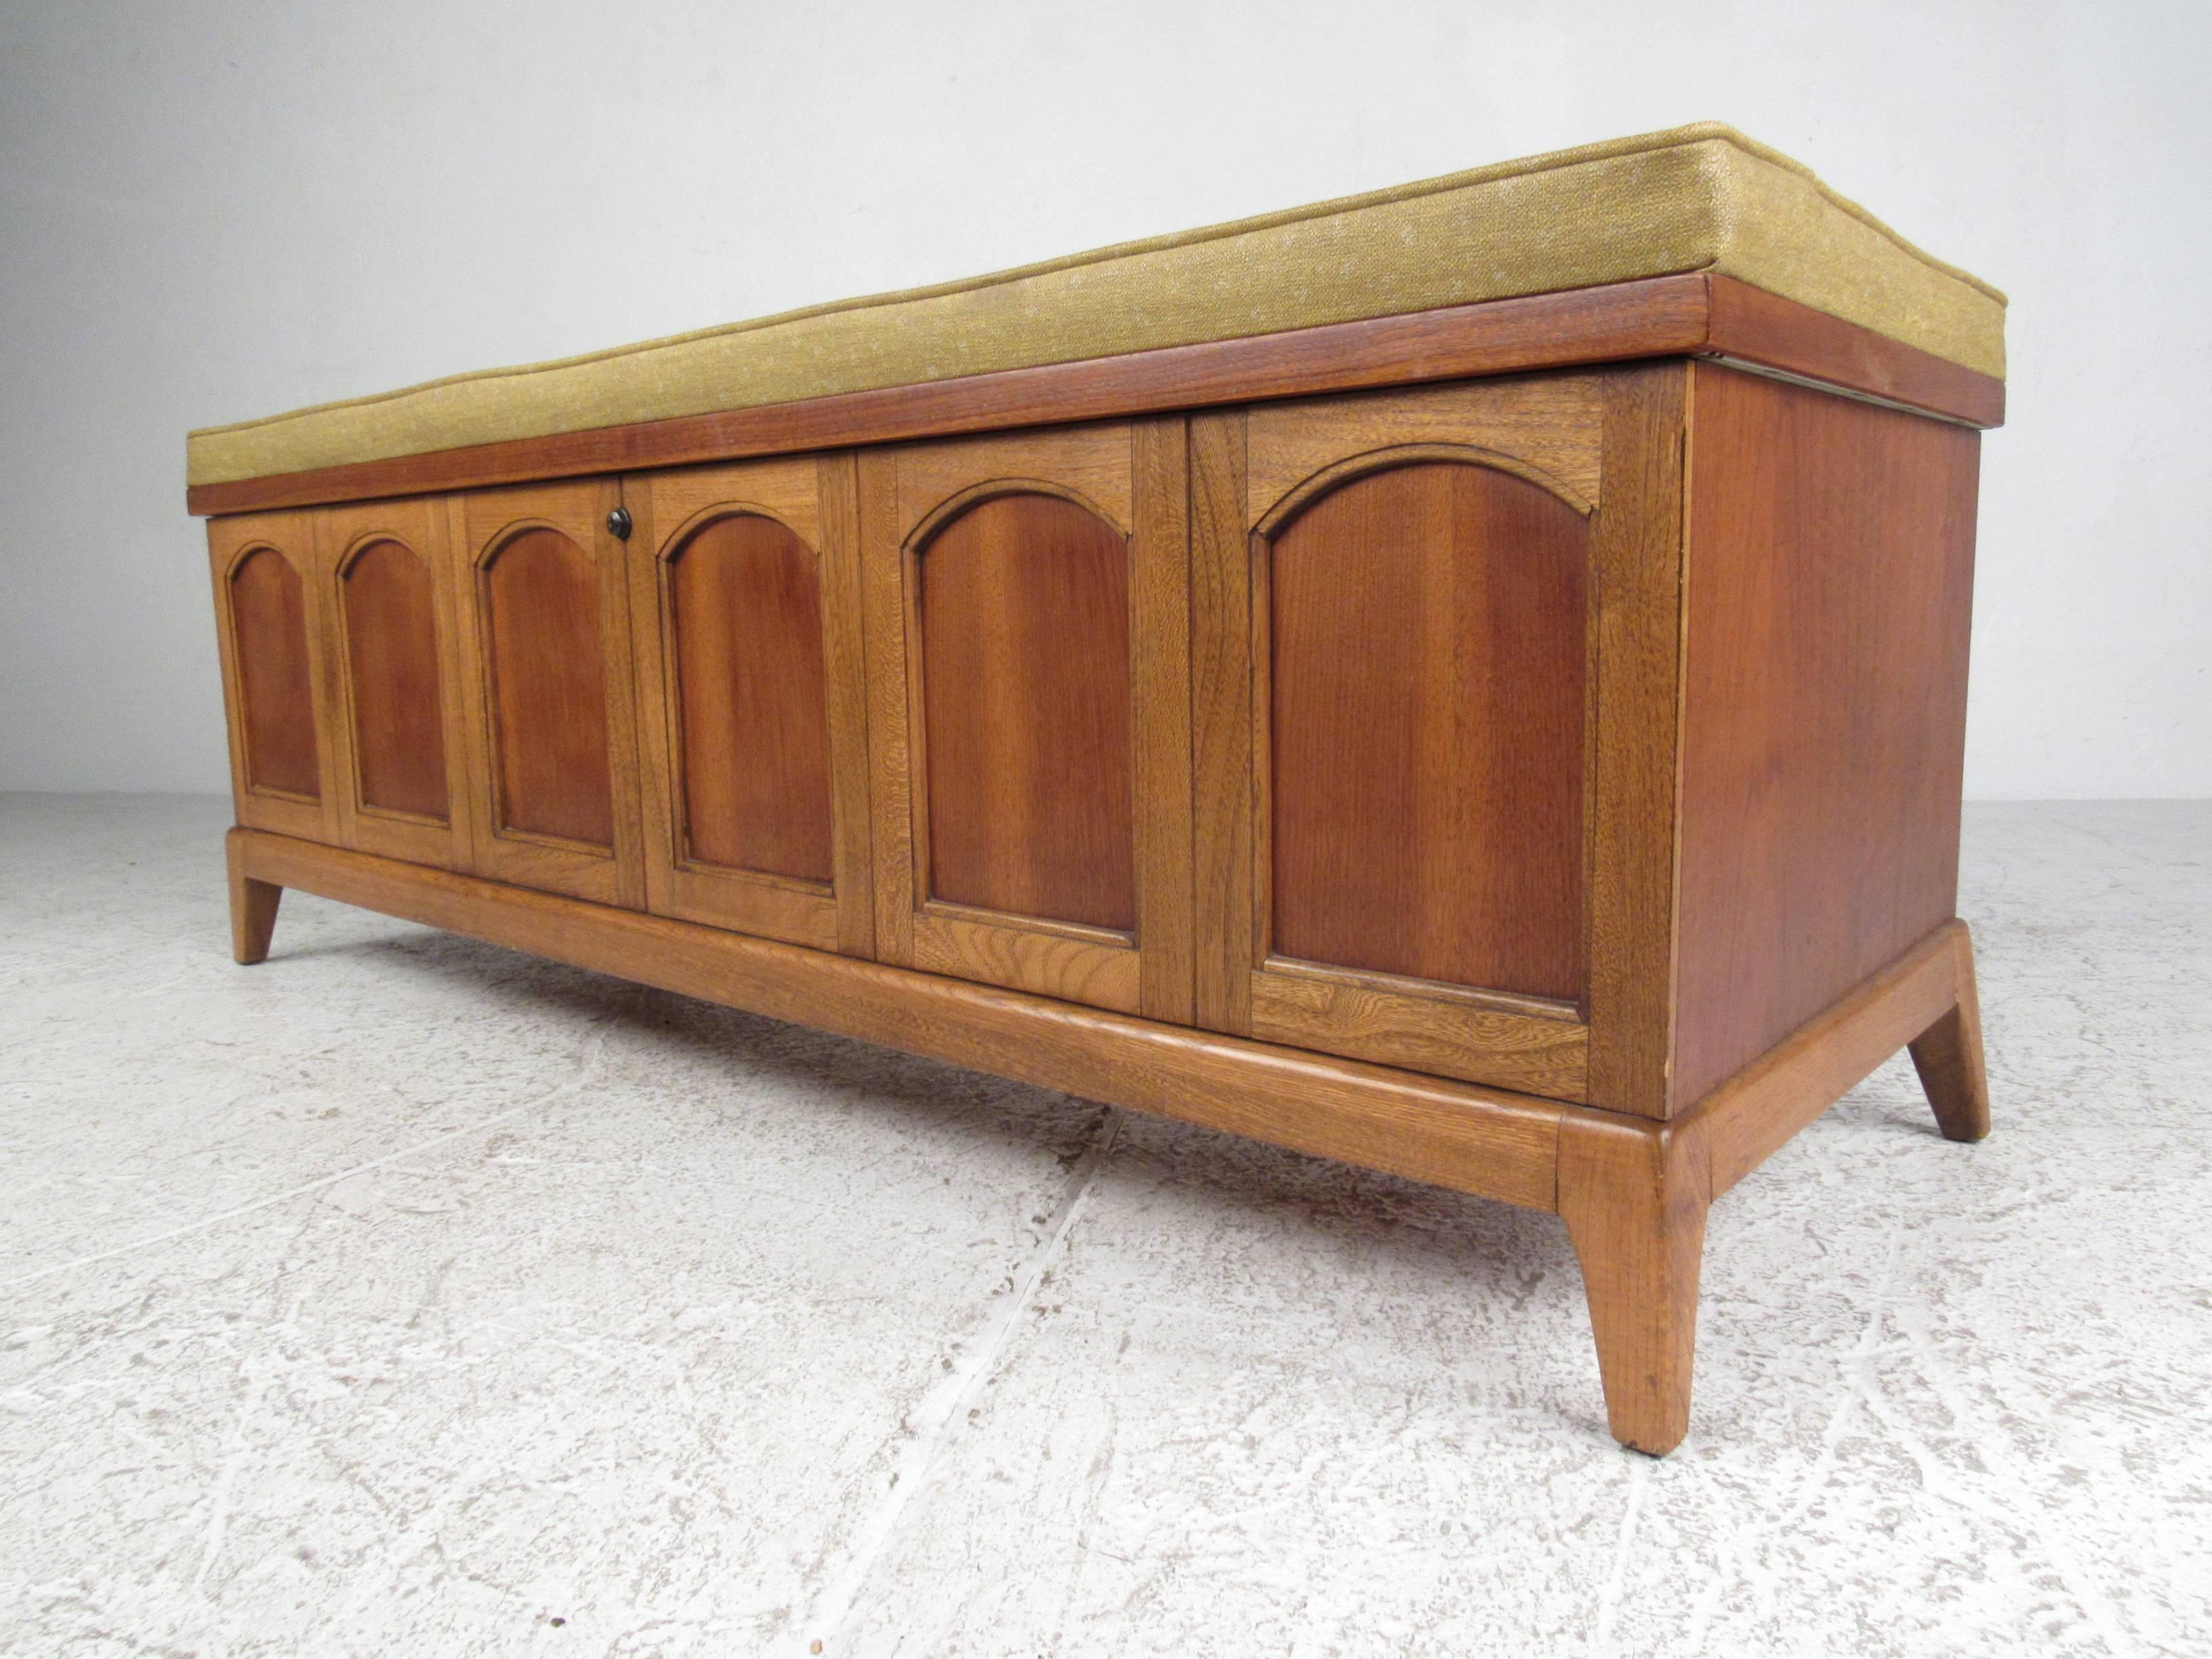 Rare blanket chest by Lane featuring vinyl tufted upholstered seat and oak and walnut exterior with cedar lined interior. Please confirm item location (NY or NJ) with dealer.